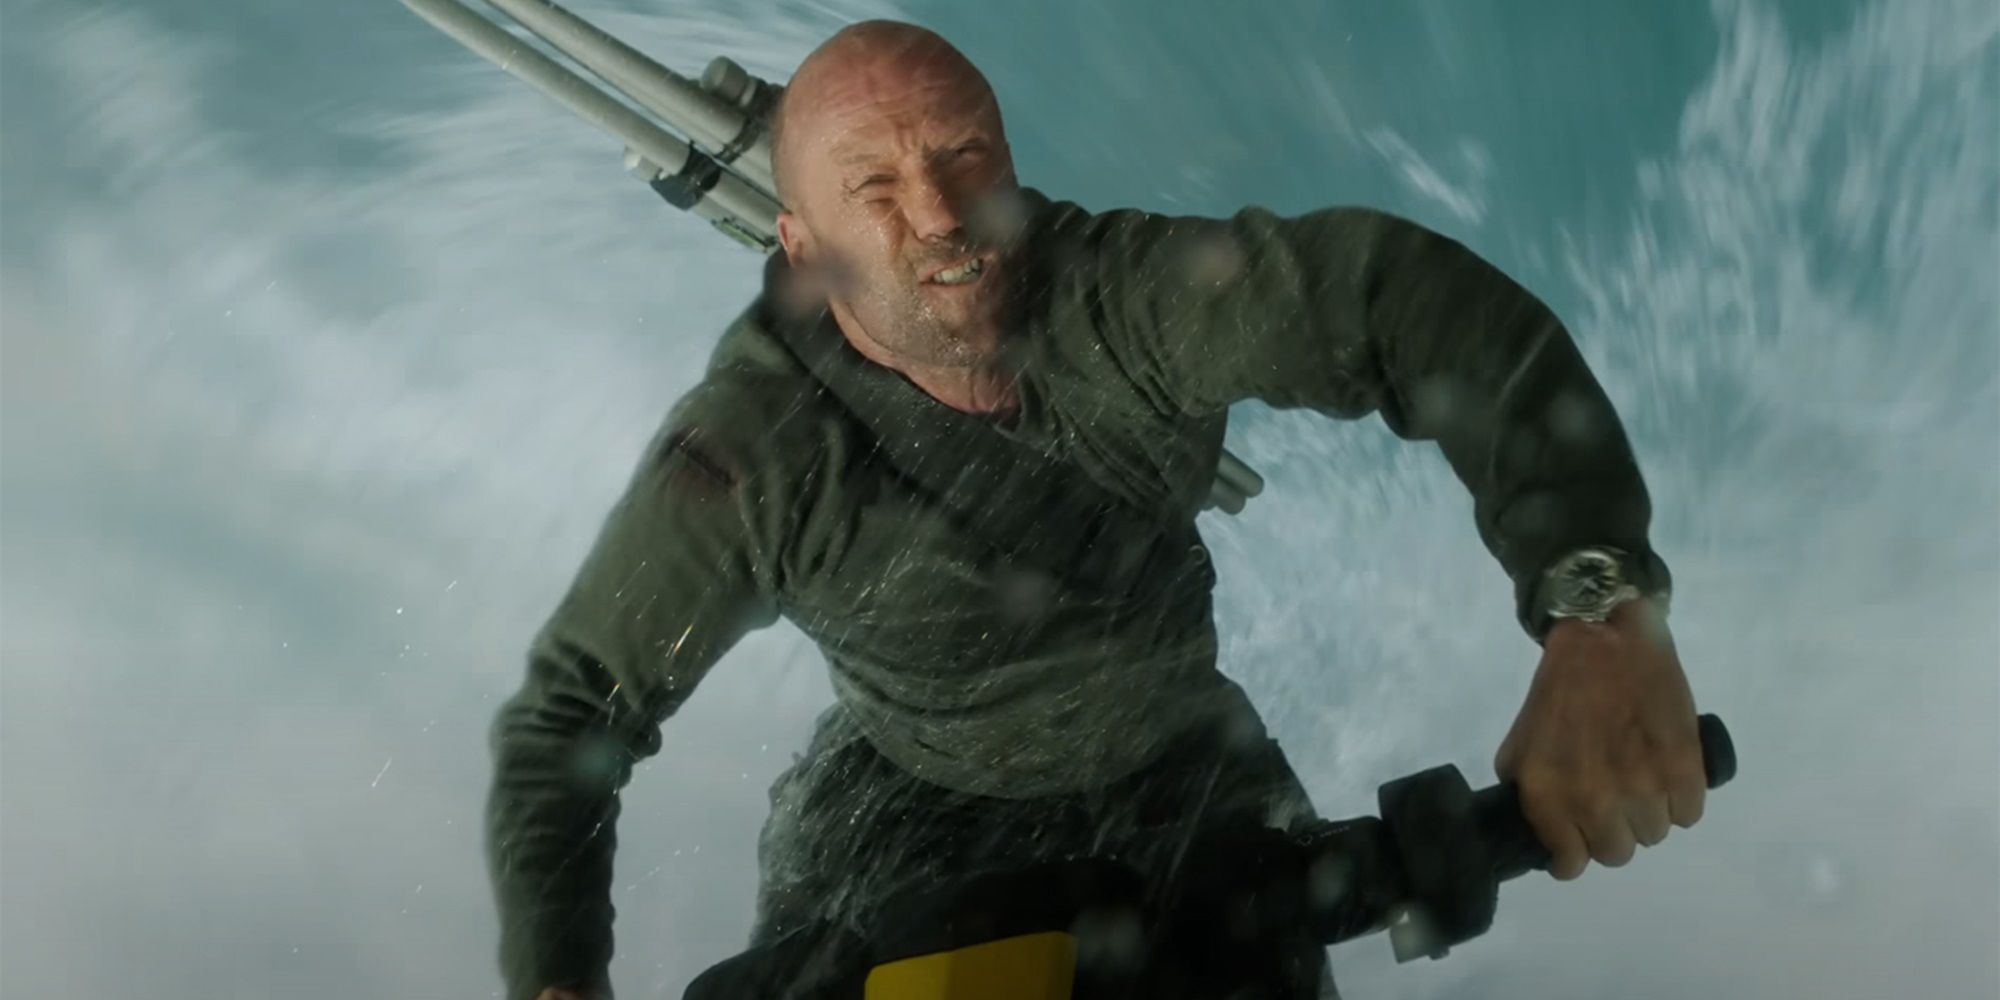 Jason Statham as Jonas Taylor riding a jet ski in The Meg 2: The Trench